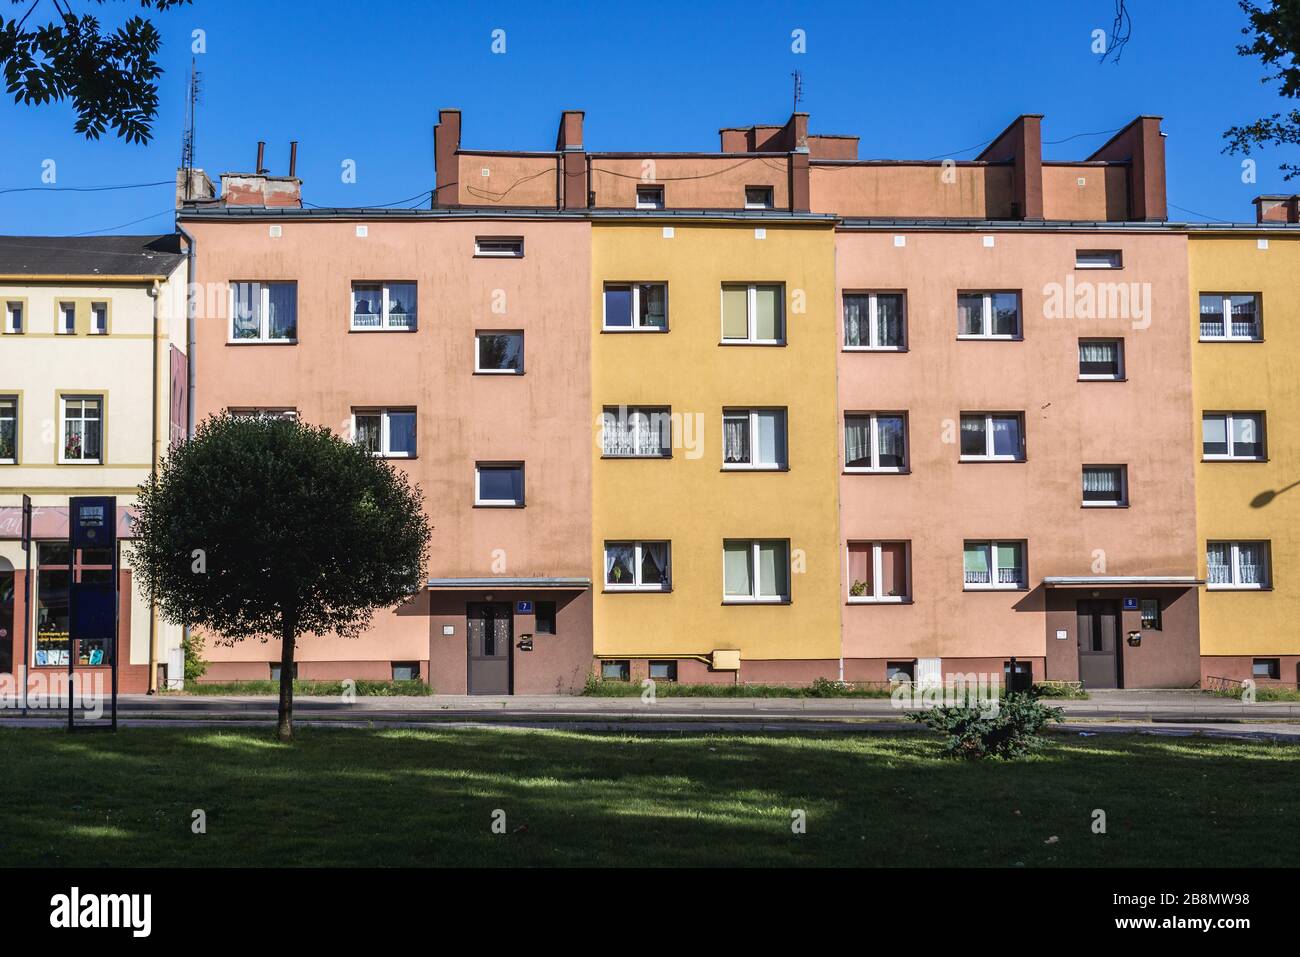 Residential building in Swidwin, capital of Swidwin County in West Pomeranian Voivodeship of northwestern Poland Stock Photo